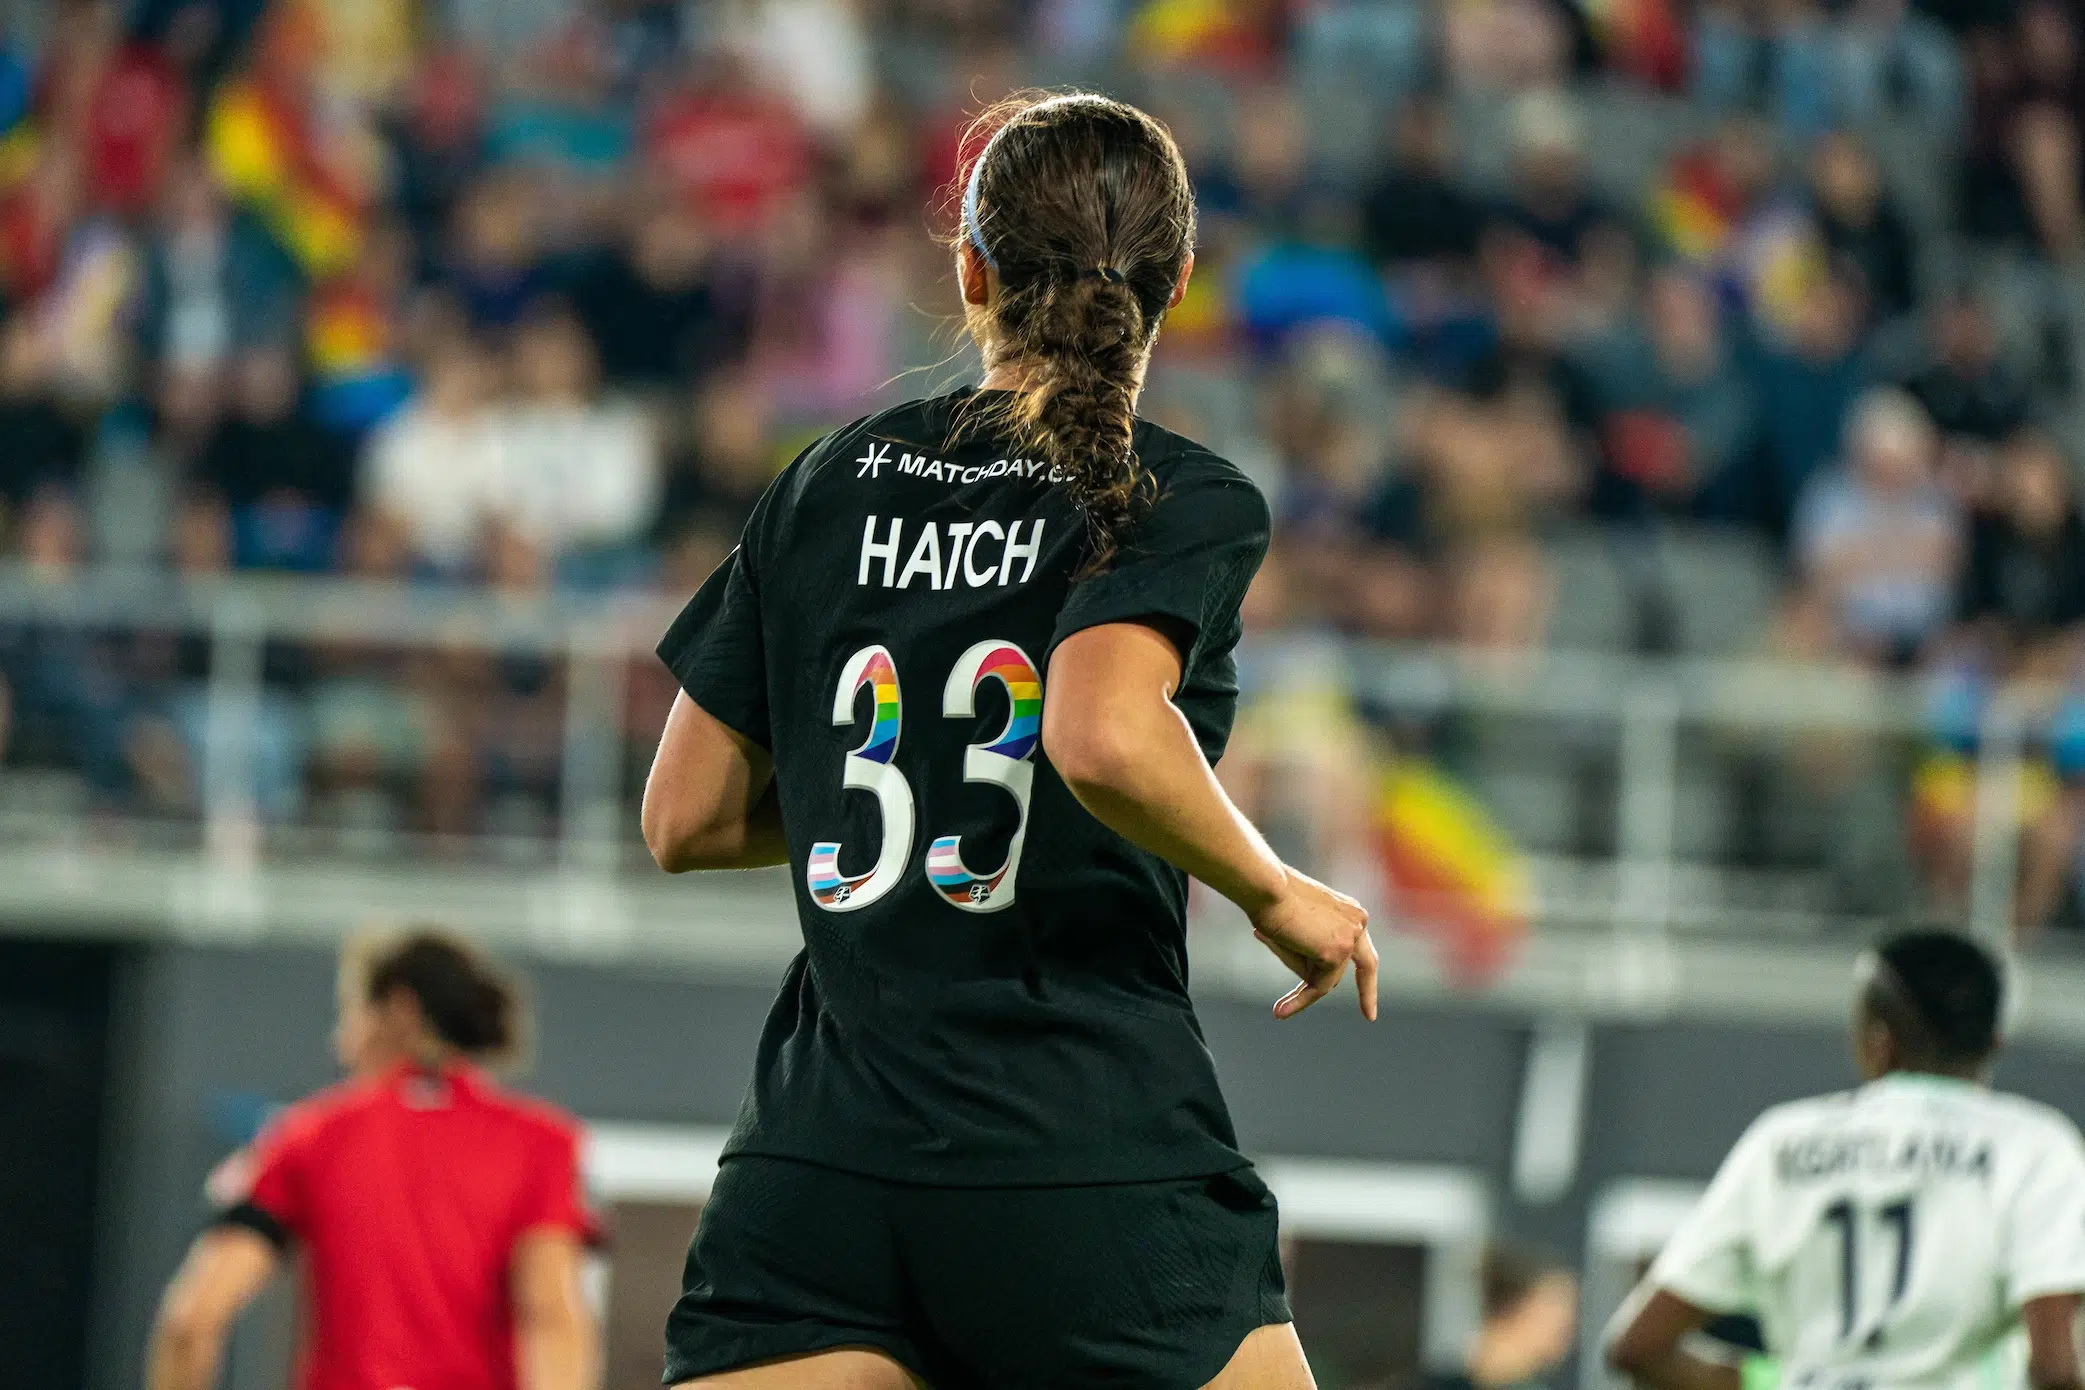 Ashley Hatch jogs away wearing an all black uniform with rainbow numbers. Her brown hair is in a braid.